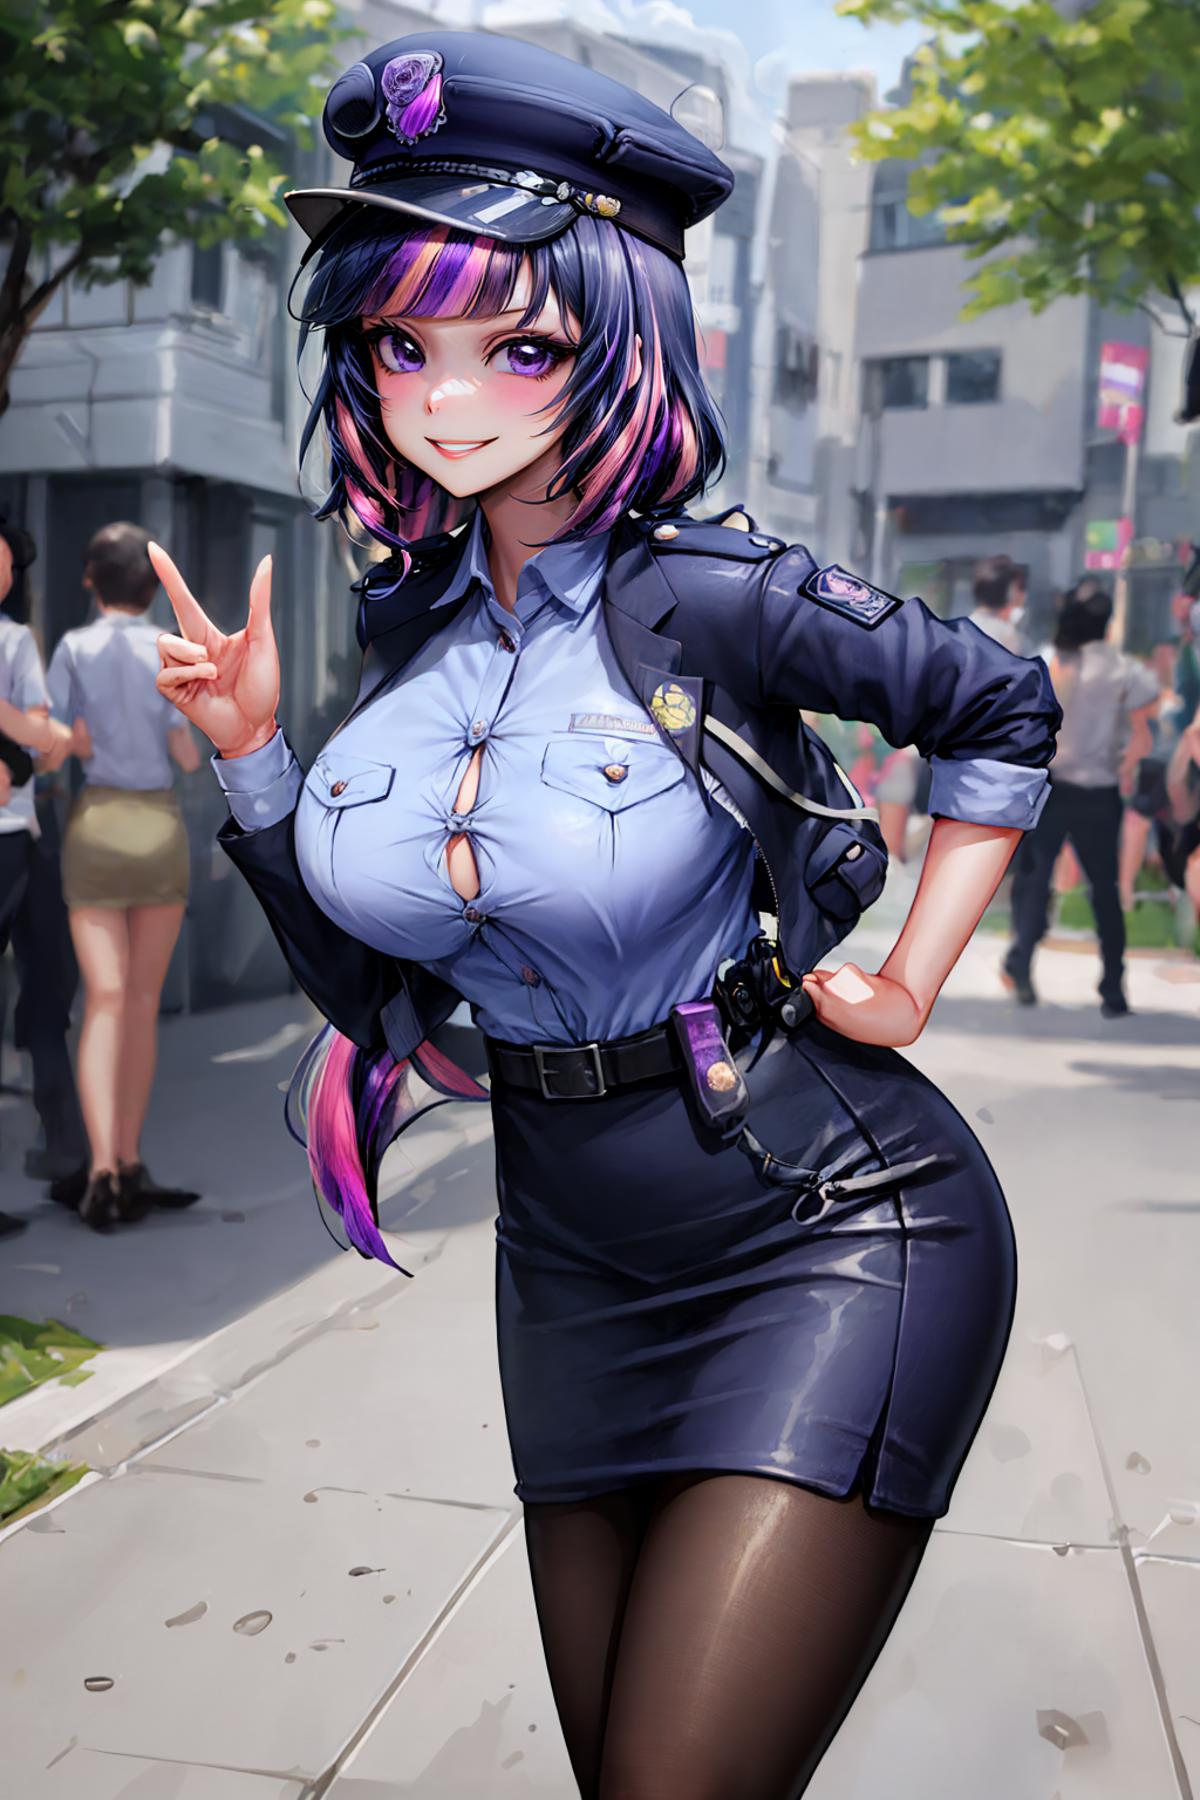 Change-A-Character: Good Cop, Your Waifu Upholds The Law! image by neilarmstron12